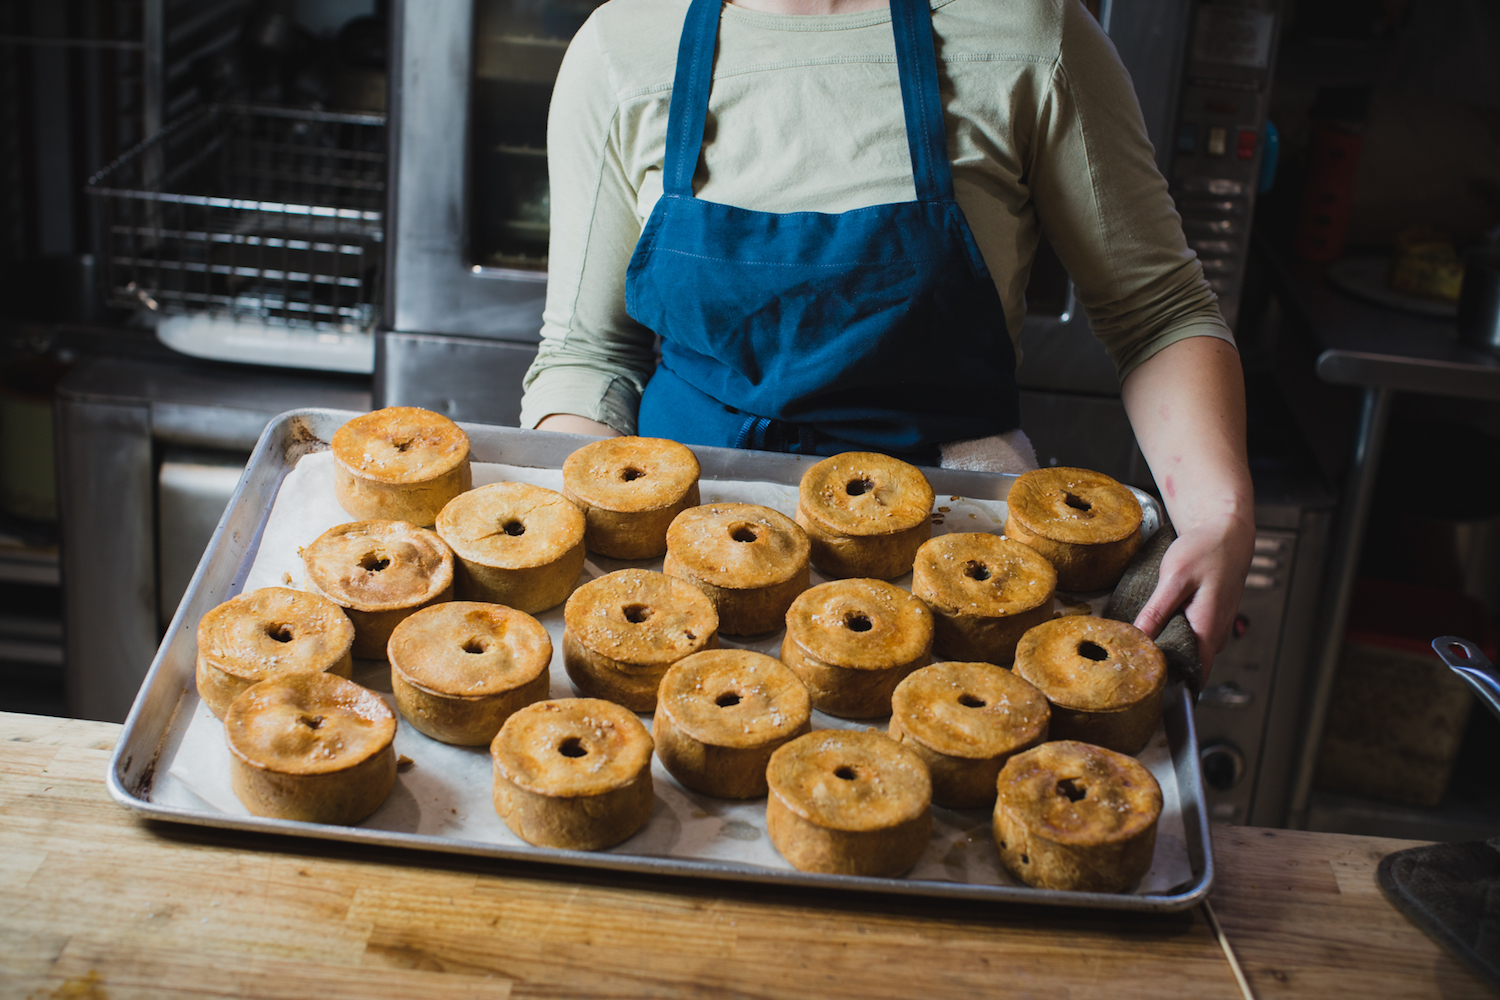 Find British meat pies and other pastries in Stafford, Vermont at Piecemeal Pies.